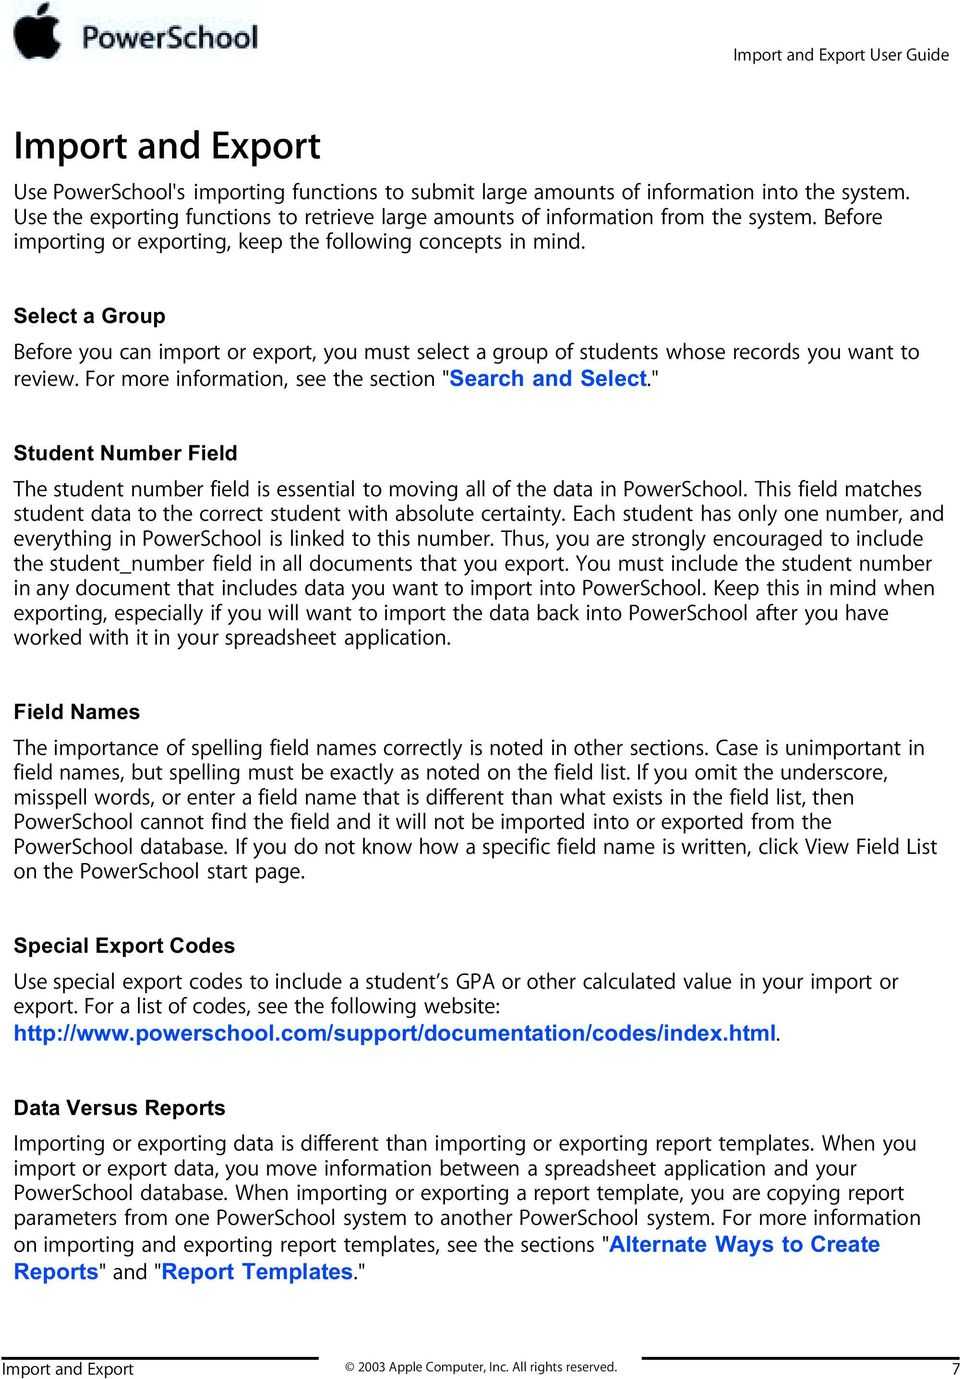 Import And Export User Guide Powerschool Student Information With Powerschool Reports Templates